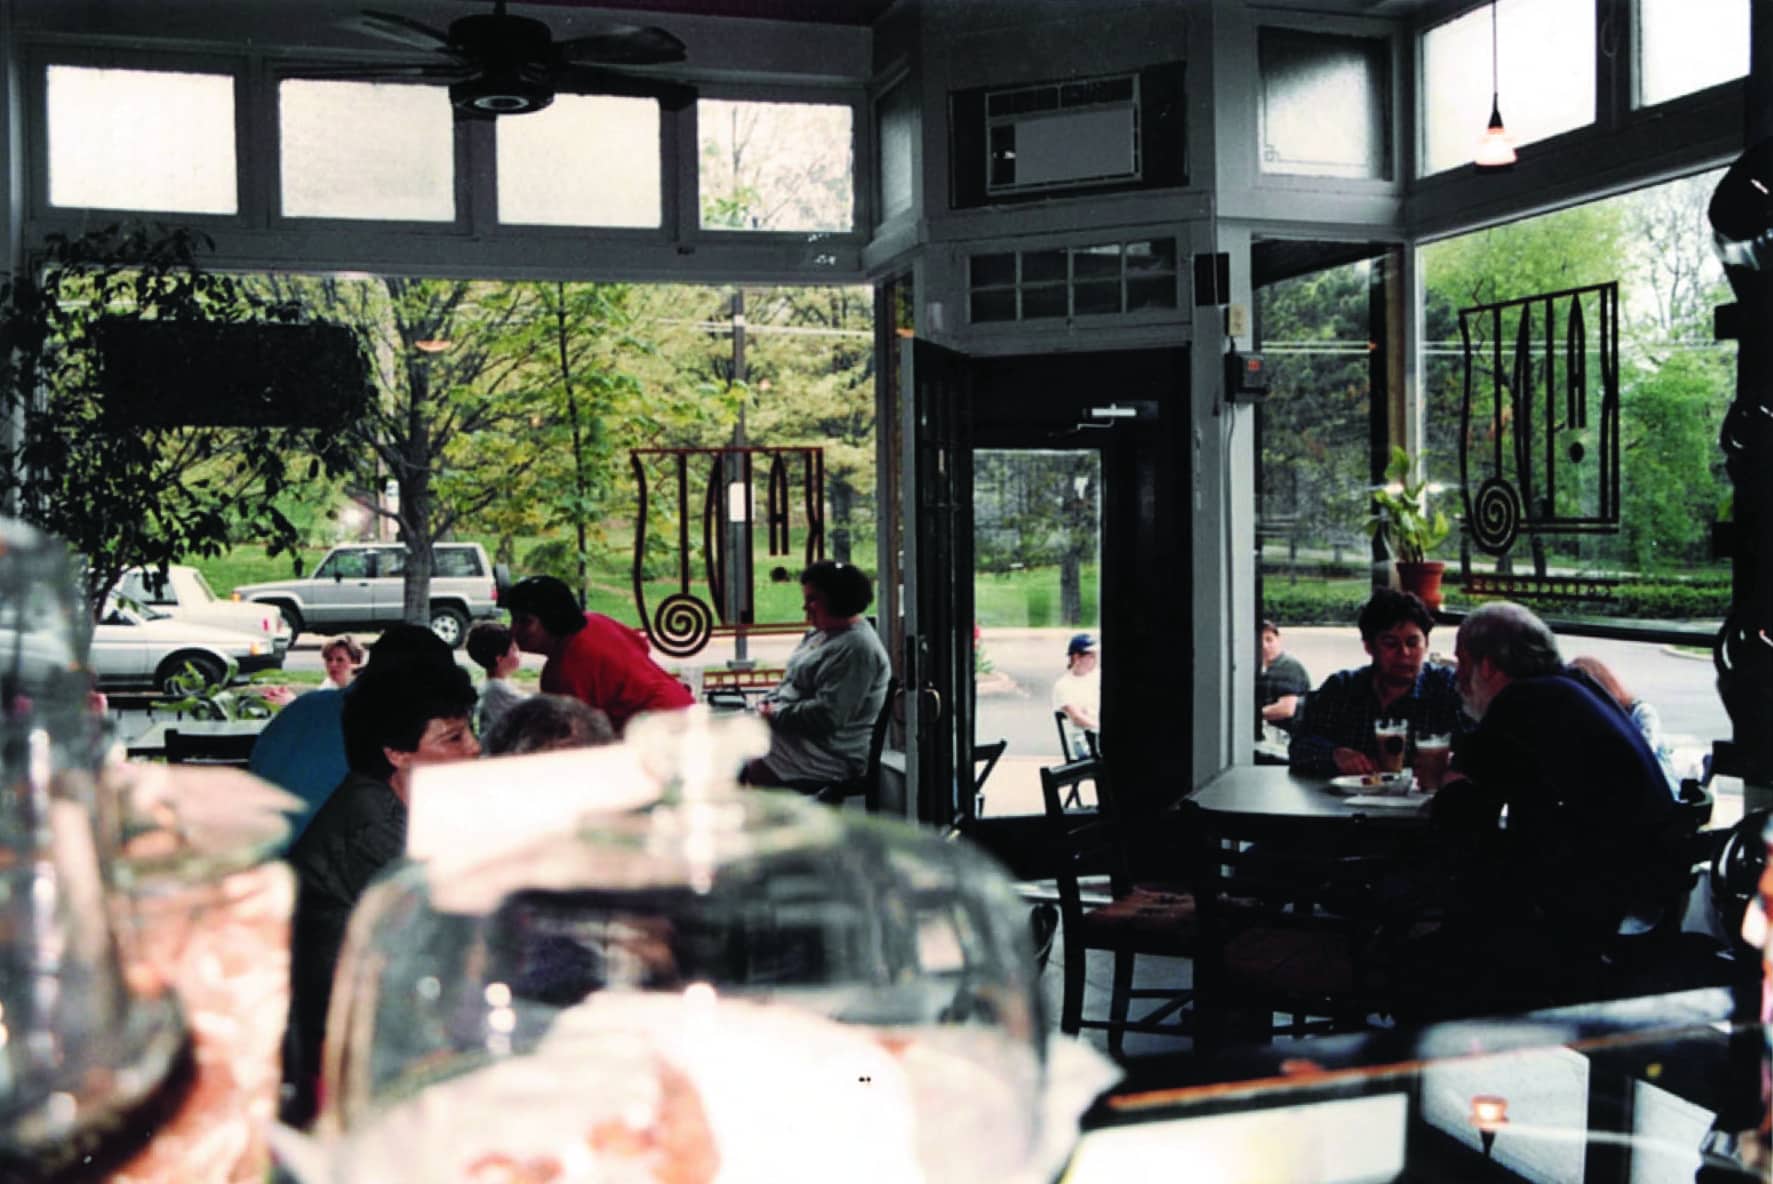 The inside of Kaldi's Coffee on DeMun in the late 90's / early 2000's